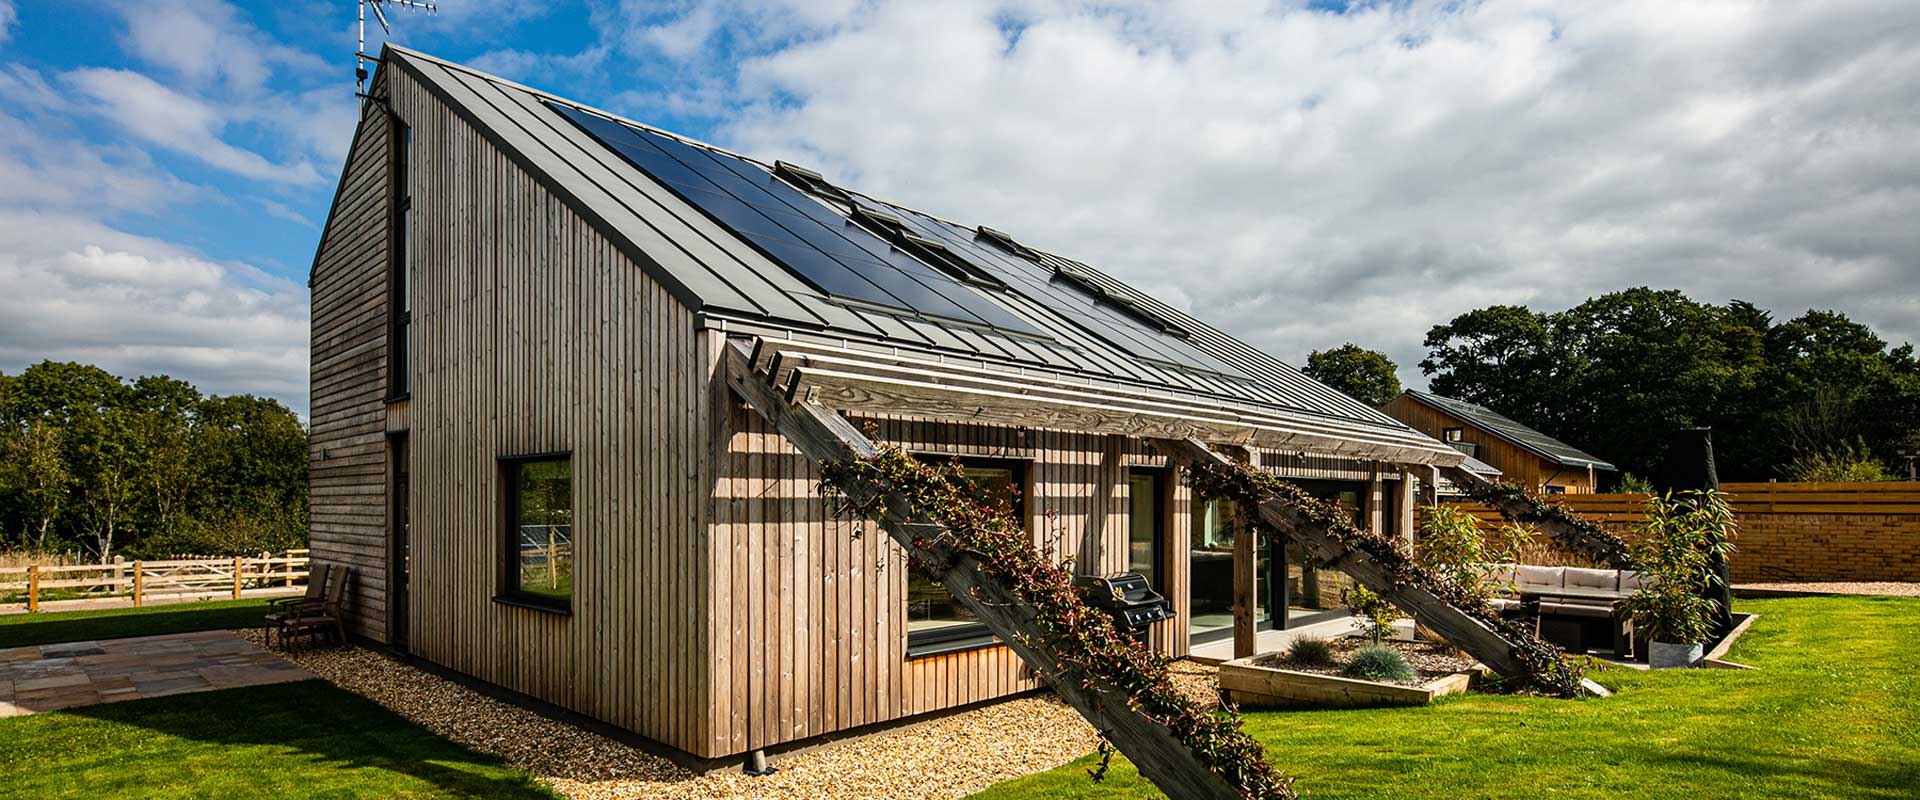 Image of a timber-clad new-build home with a slate grey roof, angled timber beams with climbing plants and black triple-glazed windows and doors